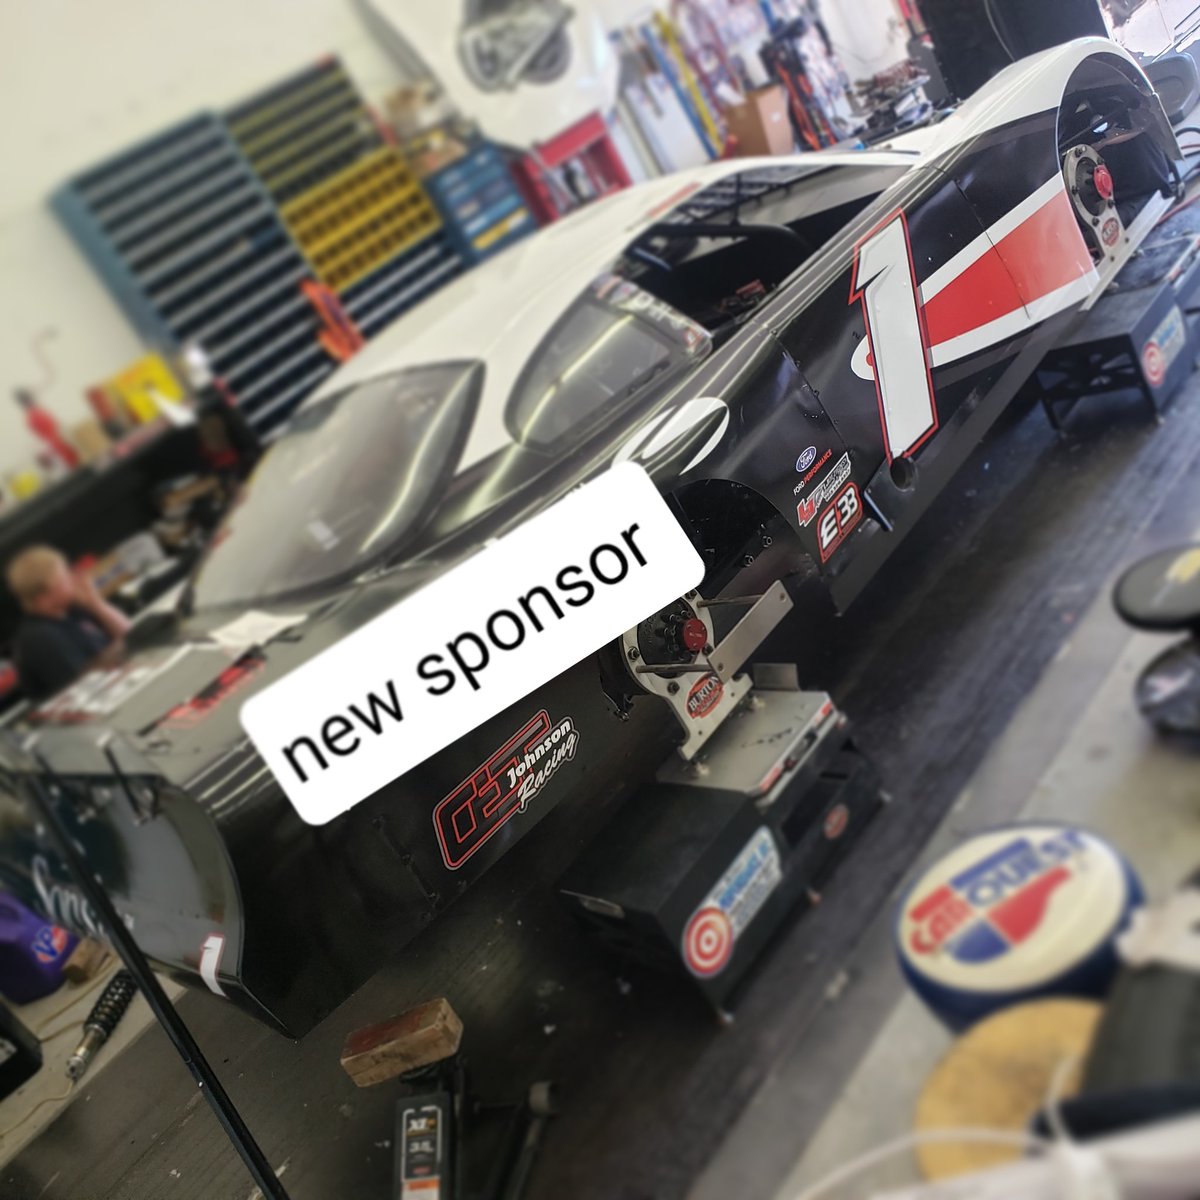 Sneak peak at Caleb Johnson's new ride and tomorrow we announce an brand new partner! Who can it be? Find out 4/26
@LJDezigns81
#pagekc
@CTWRaceParts
@FordPerformance 
@JoeCrowdes
@FortWorthScreen
#crf #hamke
#vehicleprotection 
#keepyourrideprotected
#shorttrackracing 
@Cplms09